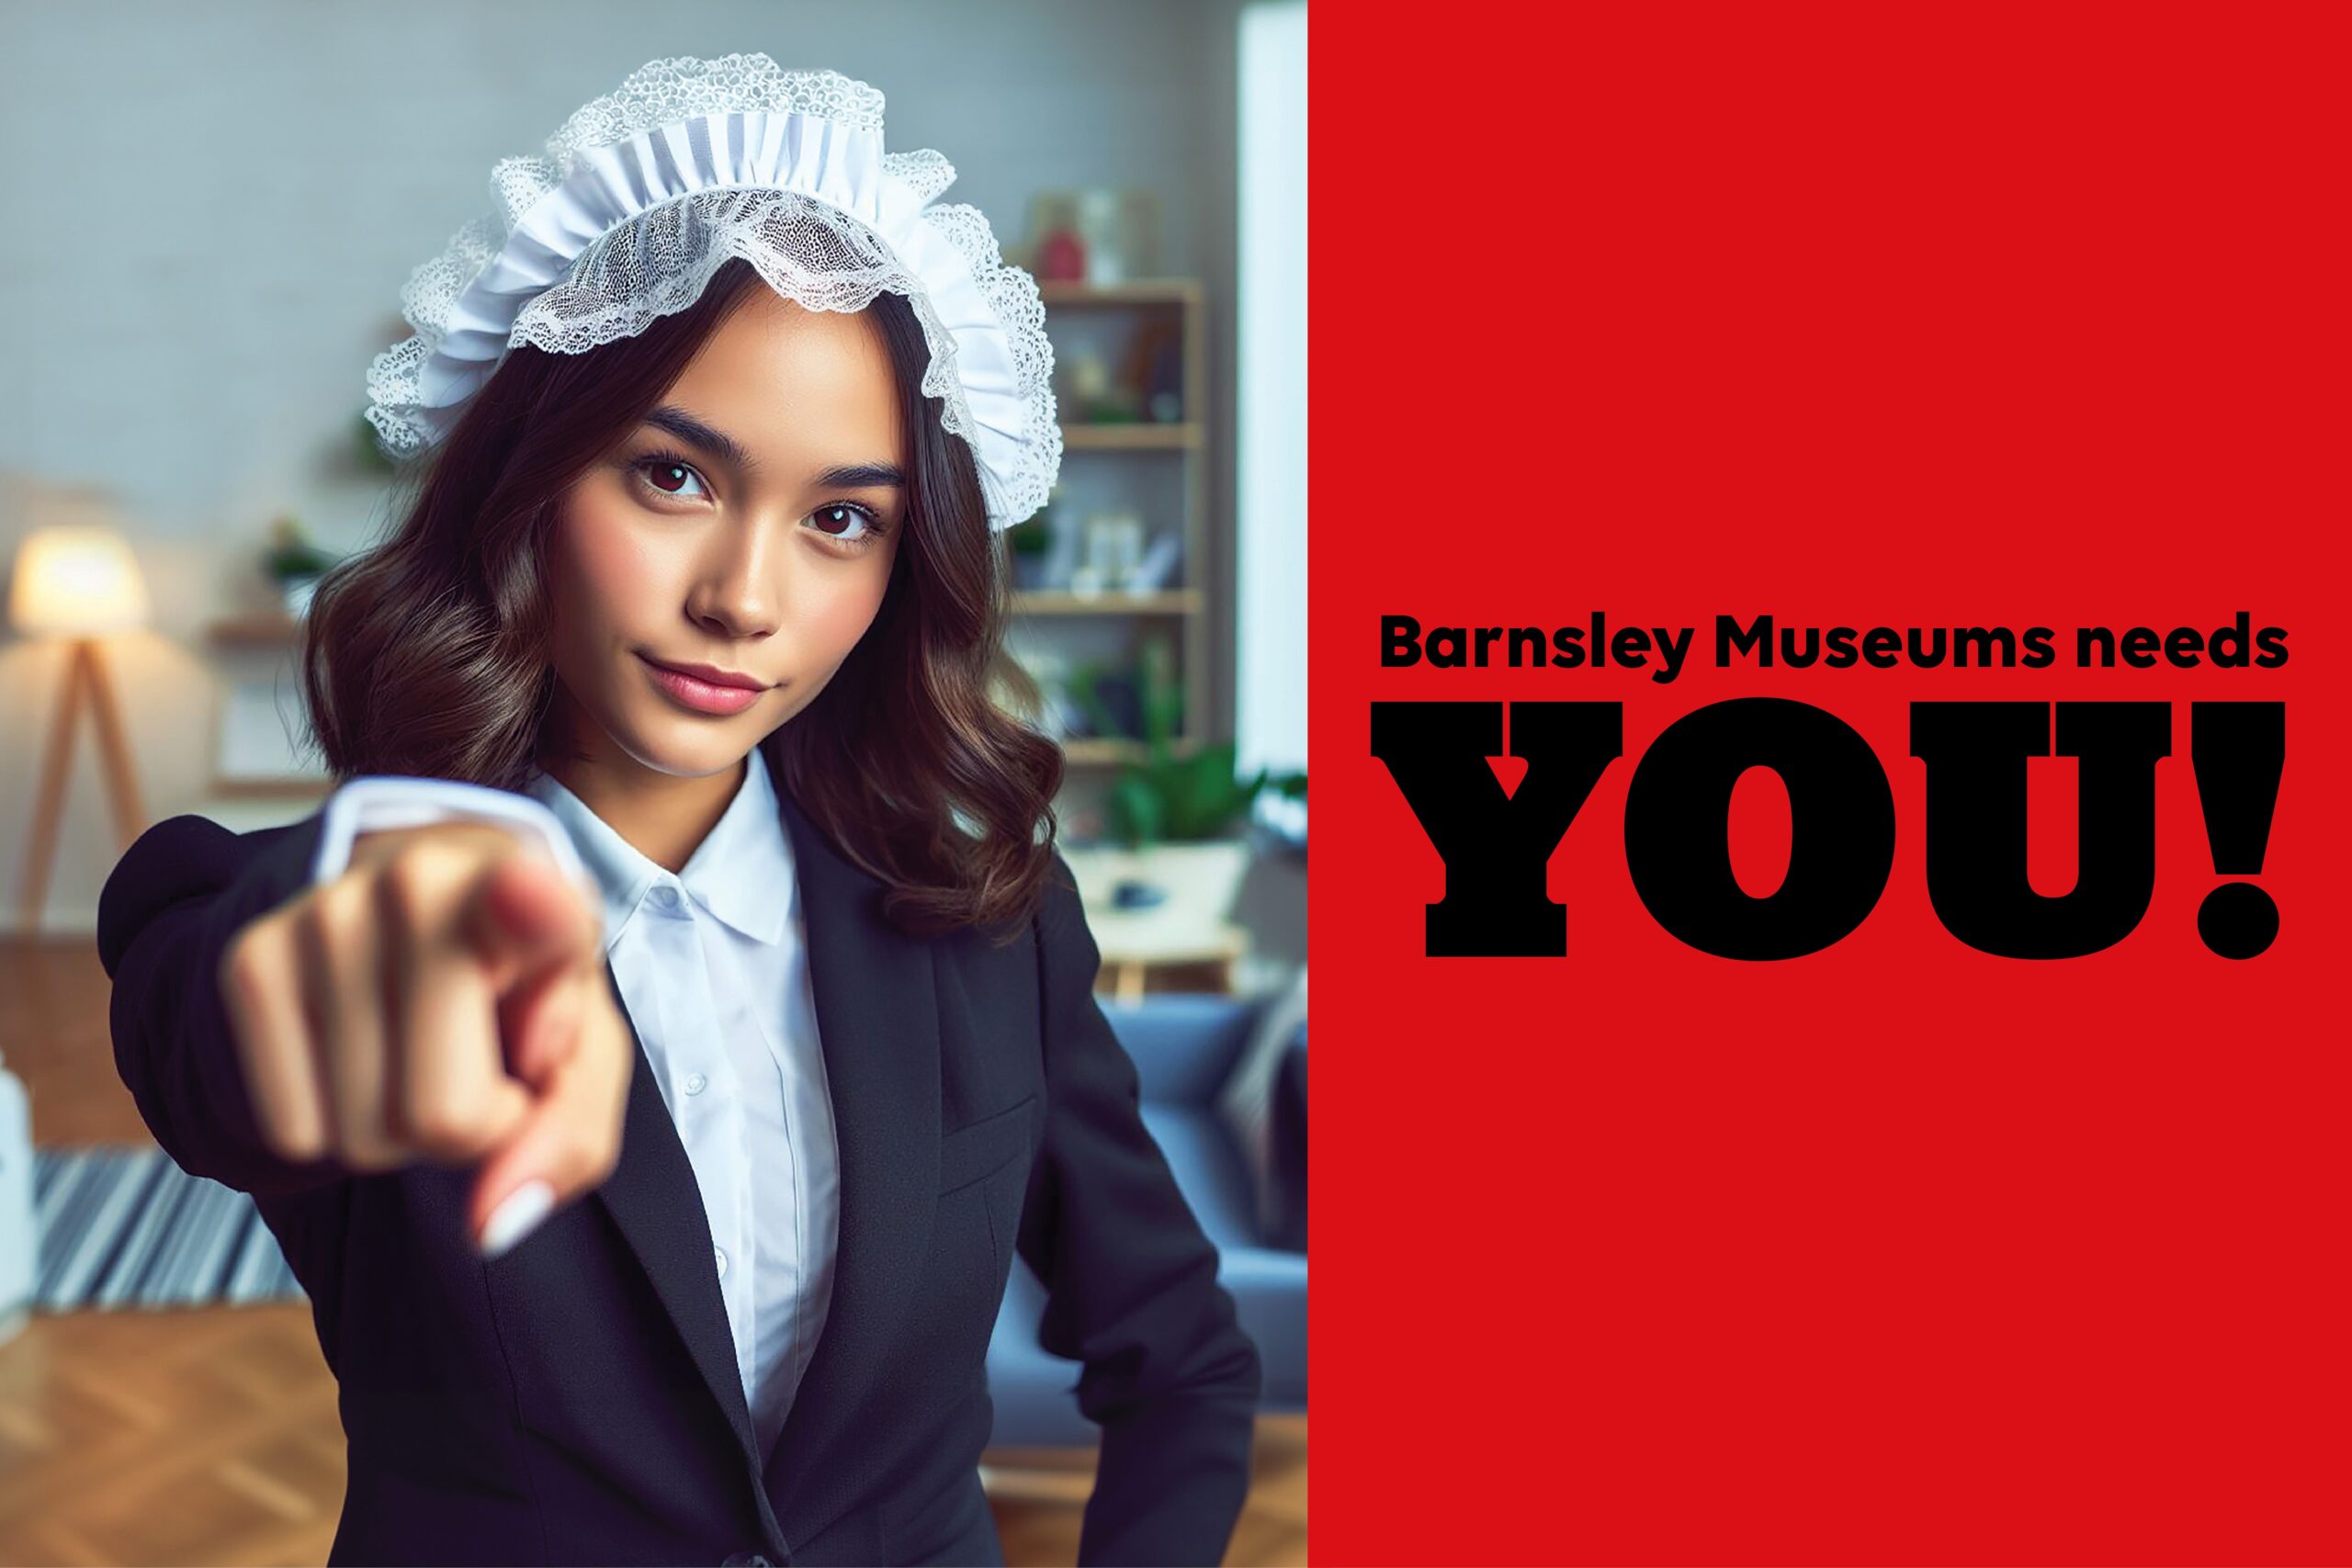 Barnsley Museums rely on funding from Barnsley Museums & Heritage Trust. With your support, we can continue to provide a source of learning, curiosity, inspiration and enjoyment for all.